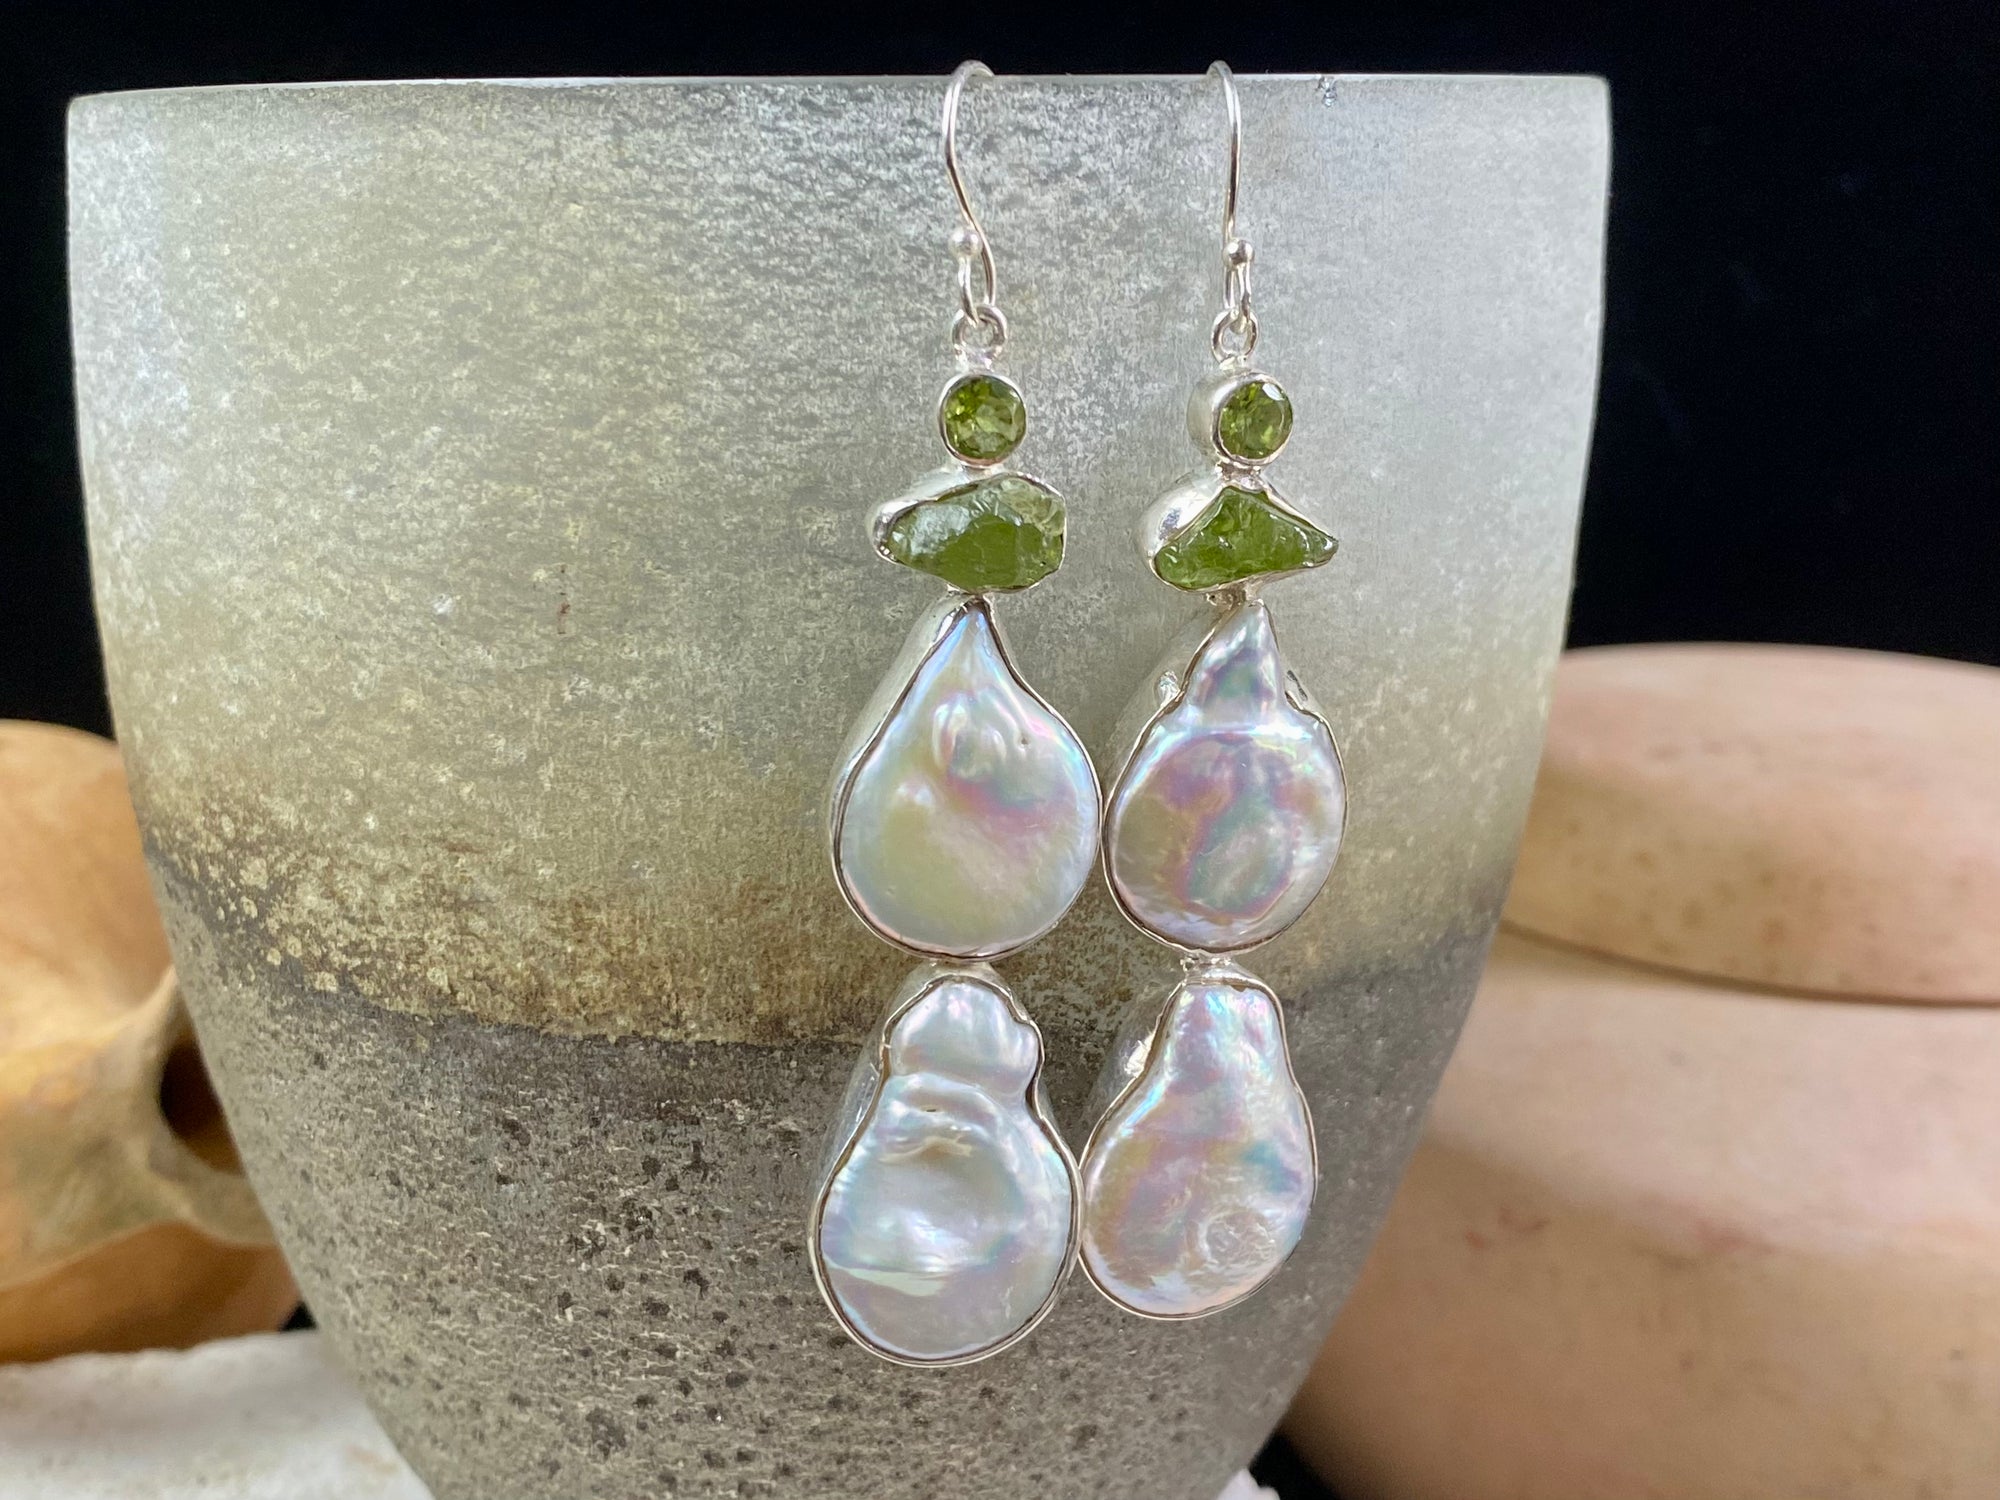 Very long earrings featuring cultured baroque pearls and peridot stones. These statement earrings are set in sterling silver, with sterling silver shepherd hooks. 8 cm length including hooks, width approximately 1.8 cm, depth 0.5 cm